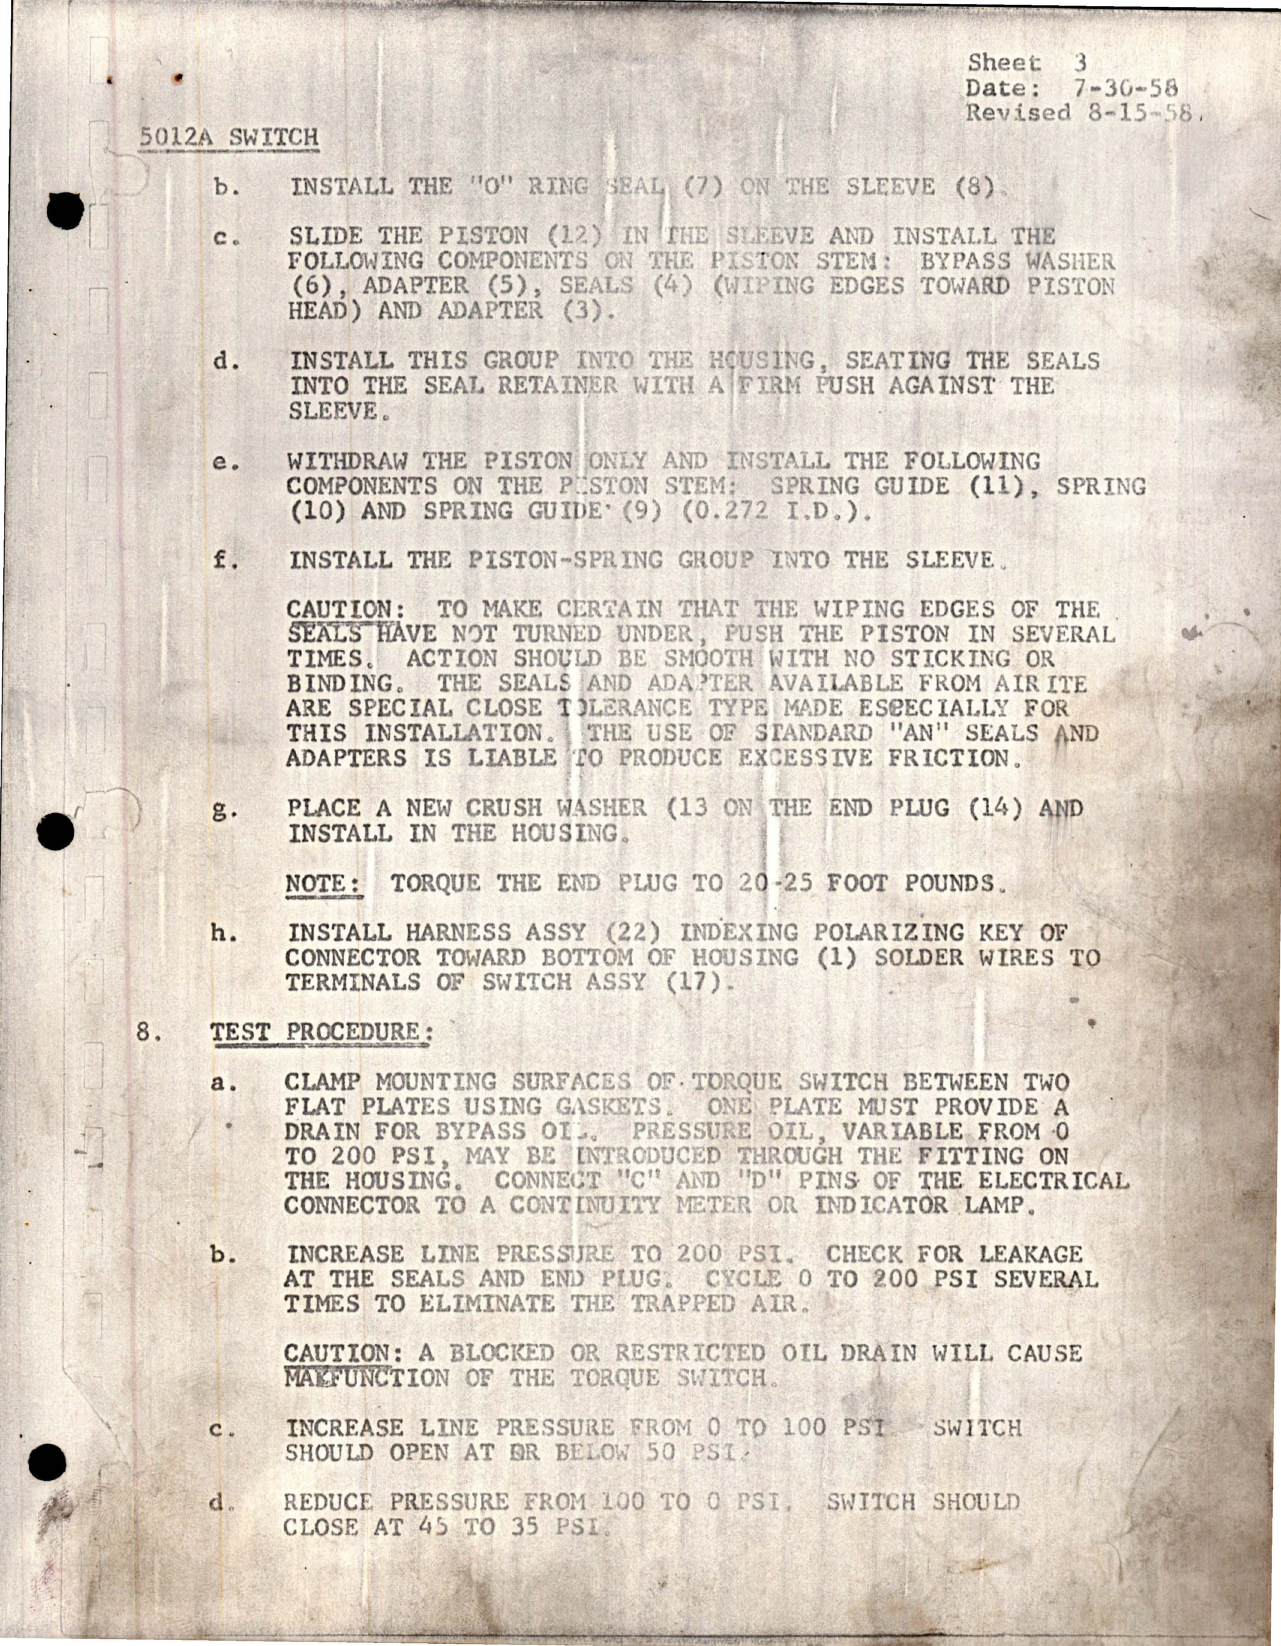 Sample page 7 from AirCorps Library document: Overhaul Procedure with Parts for Torque Pressure Switch - 5012A Series 